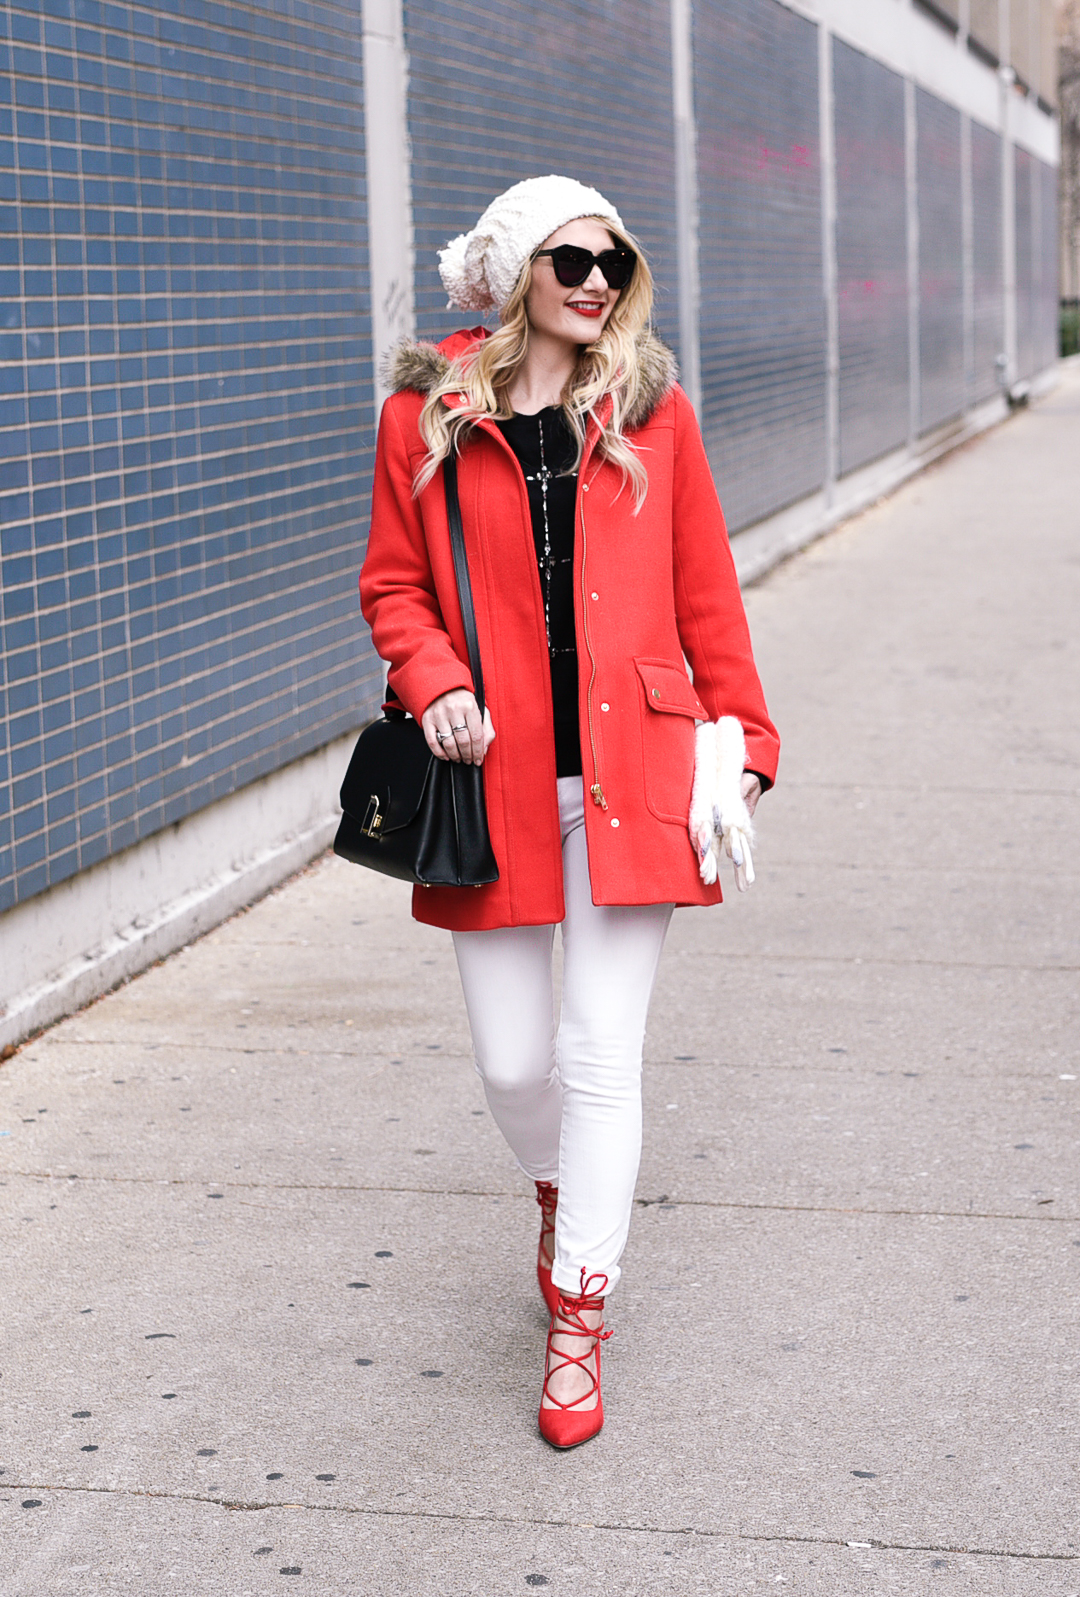 Red Vail Parka, White skinny jeans, red lace up pumps, and a black Henri Bendel satchel. 